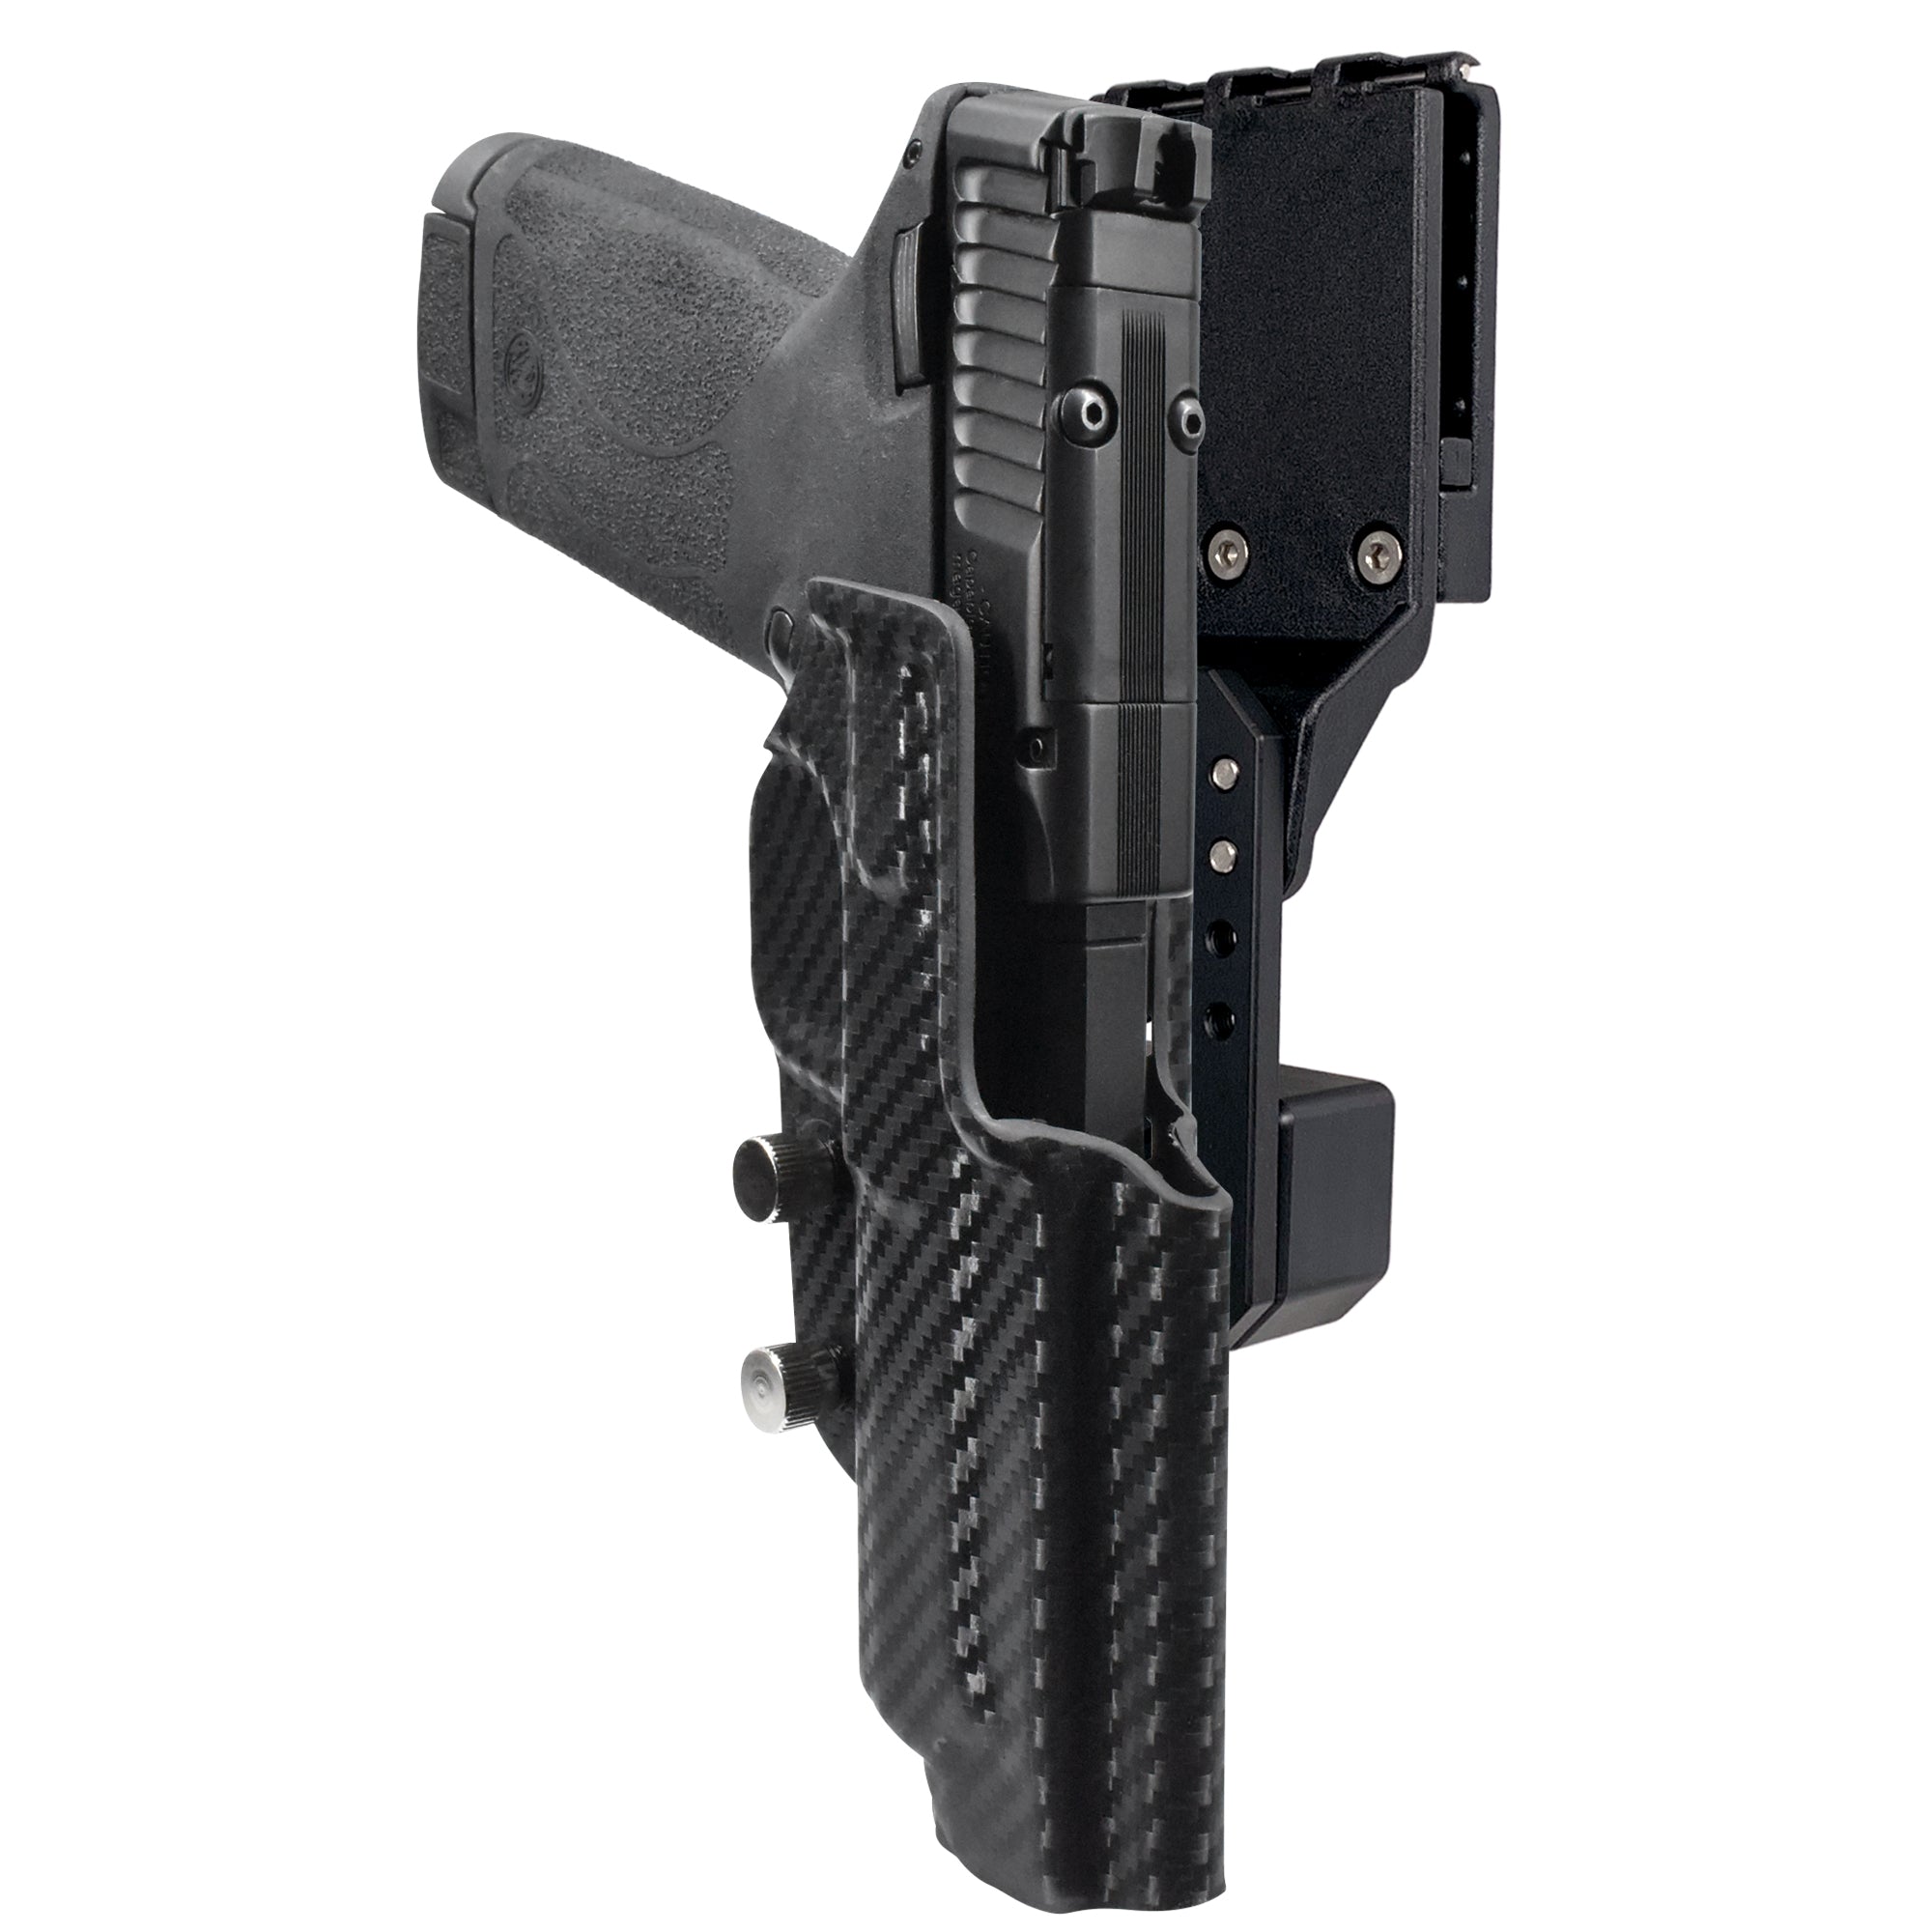 Smith & Wesson M&P 22 Magnum Pro Competition Holster in Carbon Fiber